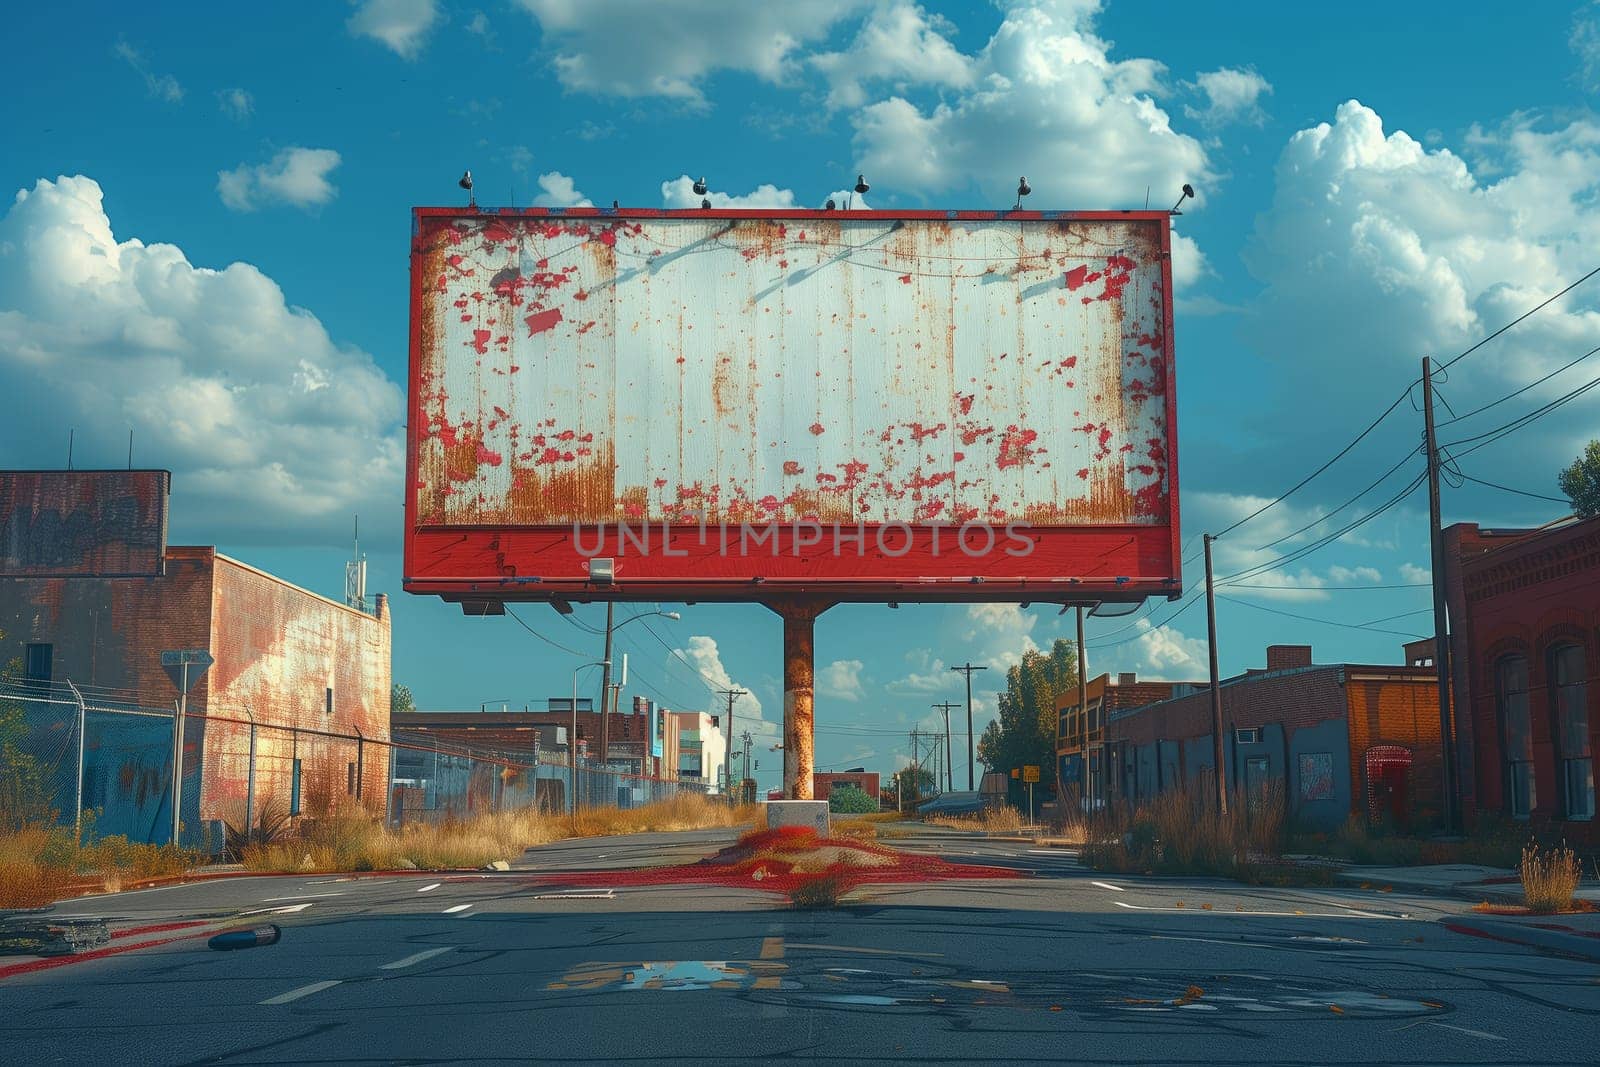 An old, rusty billboard with faded font sits on the side of the road, under a cloudy sky. It serves as a display device for passing travelers